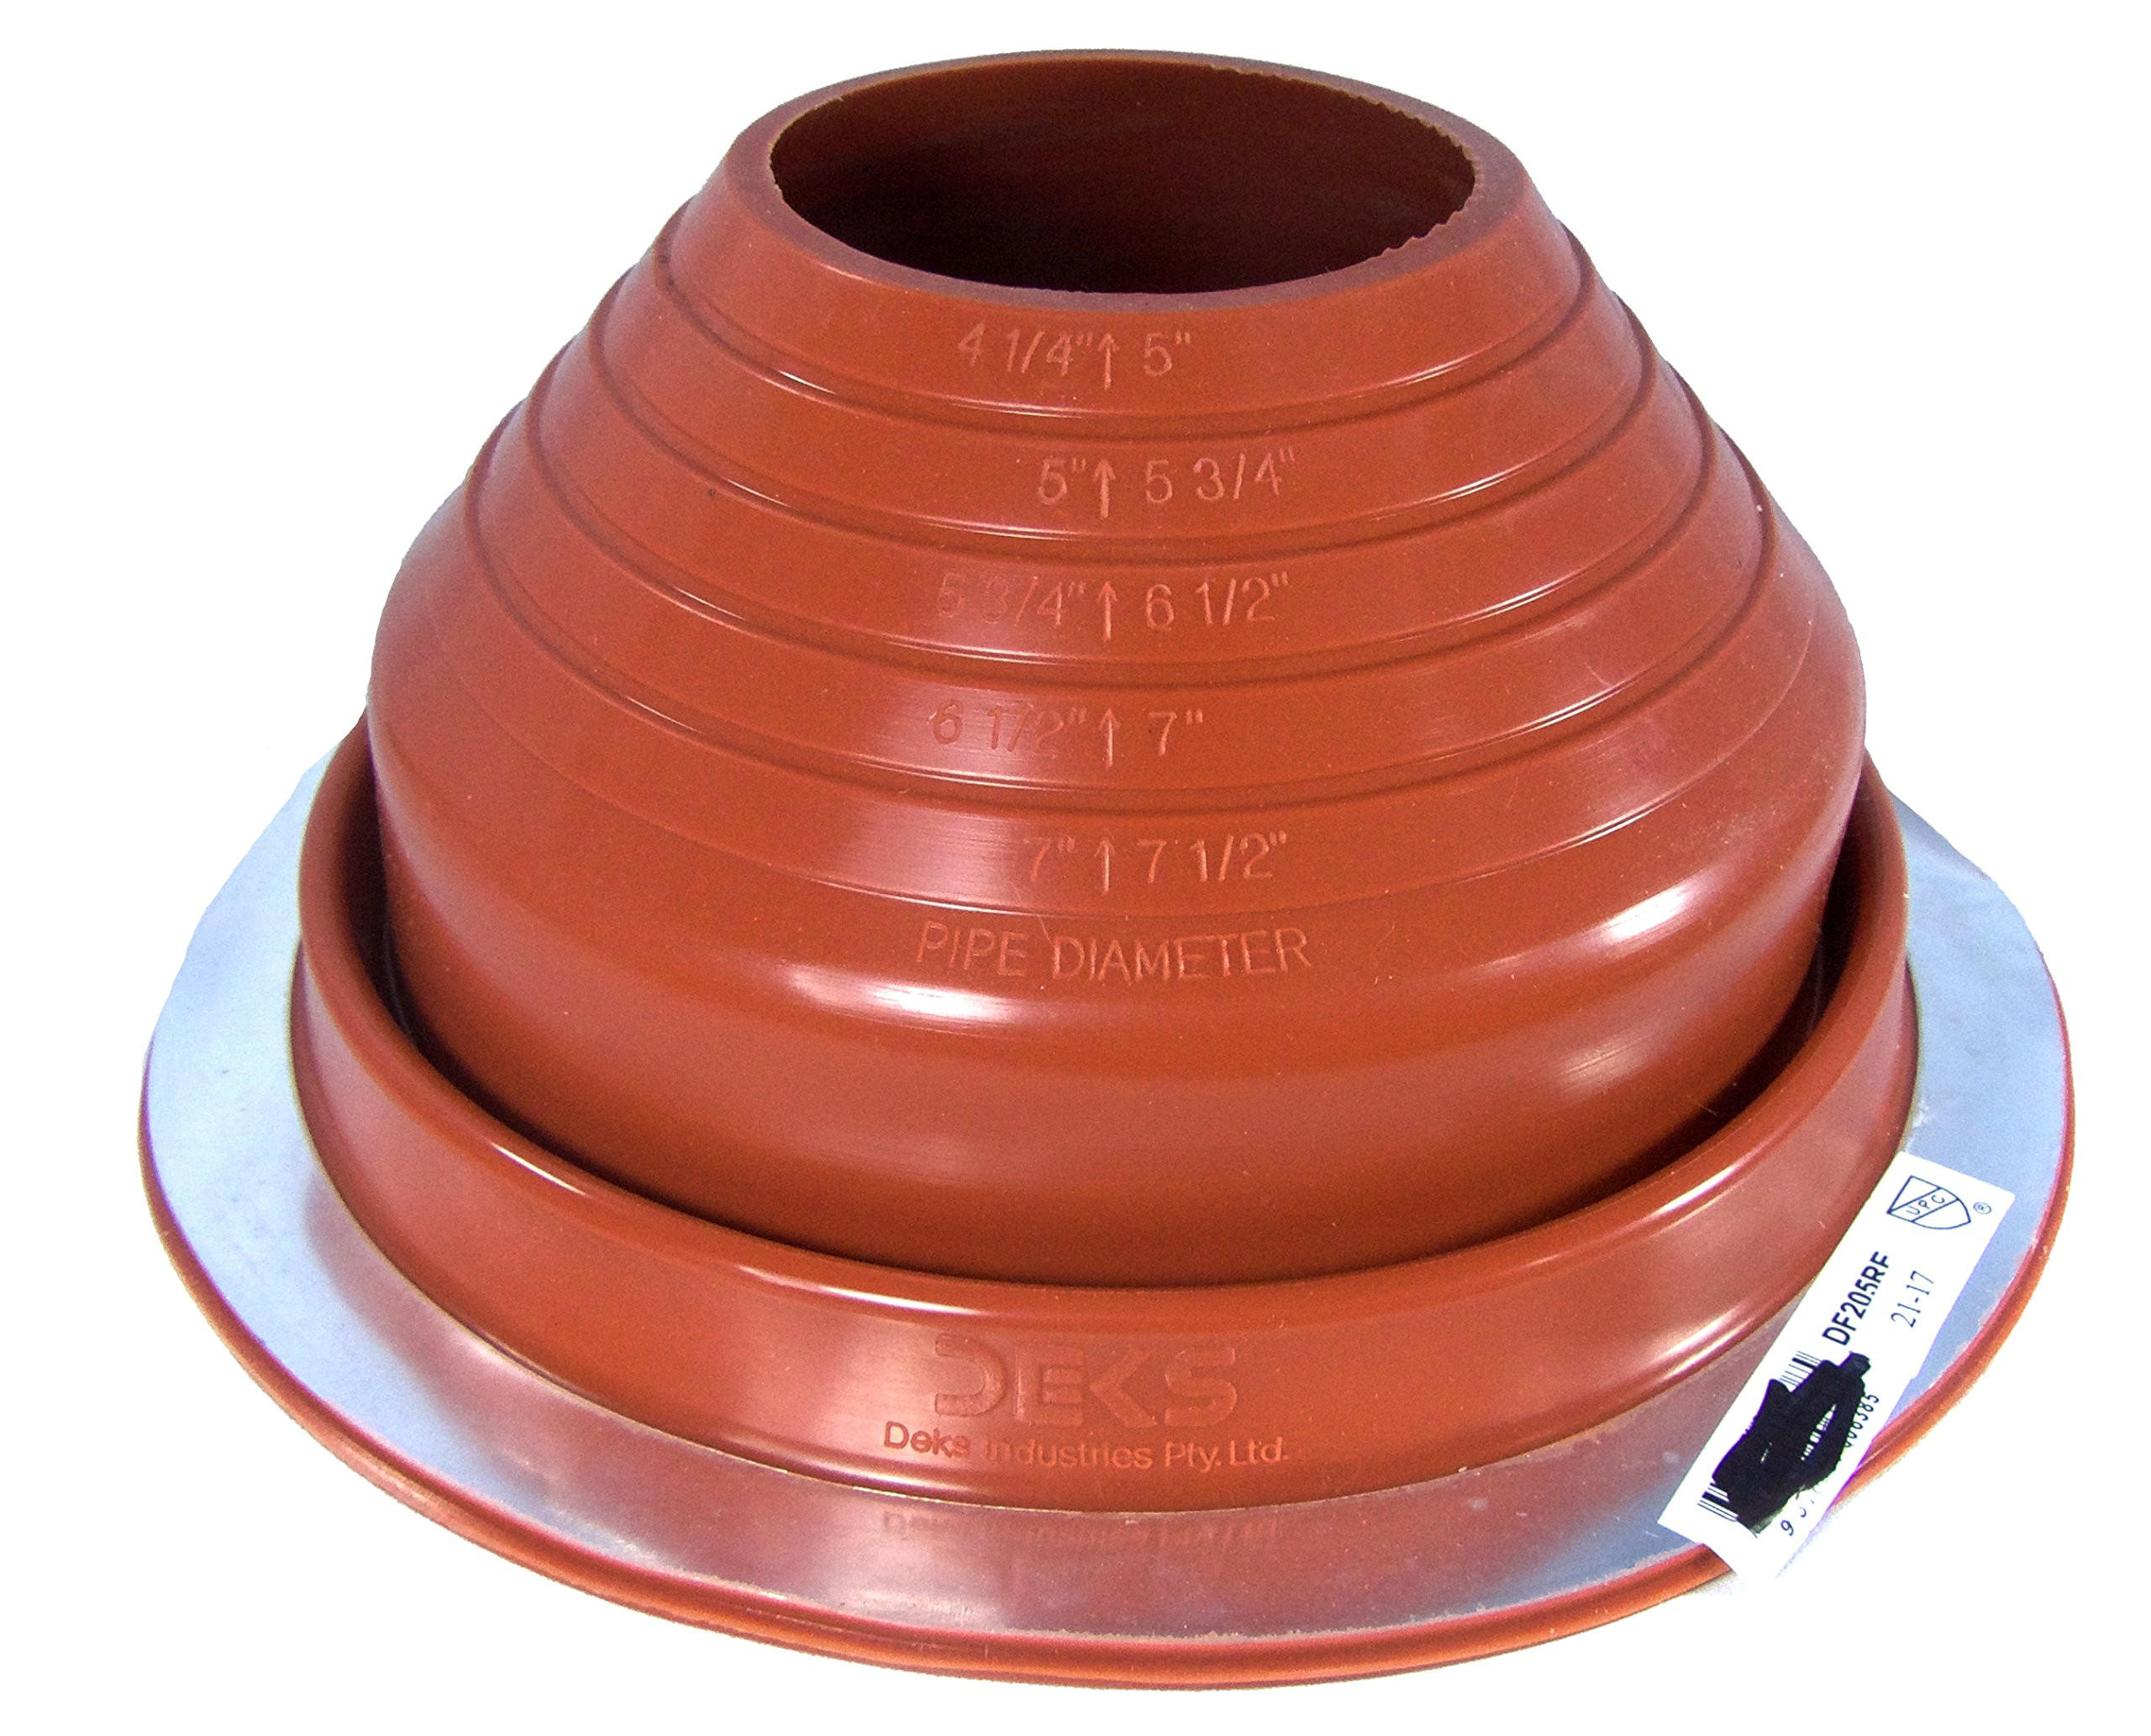 12 Recommended Cherokee Wedding Vase for Sale 2024 free download cherokee wedding vase for sale of dektite 5 red silicone metal roof pipe flashing round base pipe pertaining to dektite 5 red silicone metal roof pipe flashing round base pipe od 4 1 4 7 1 2